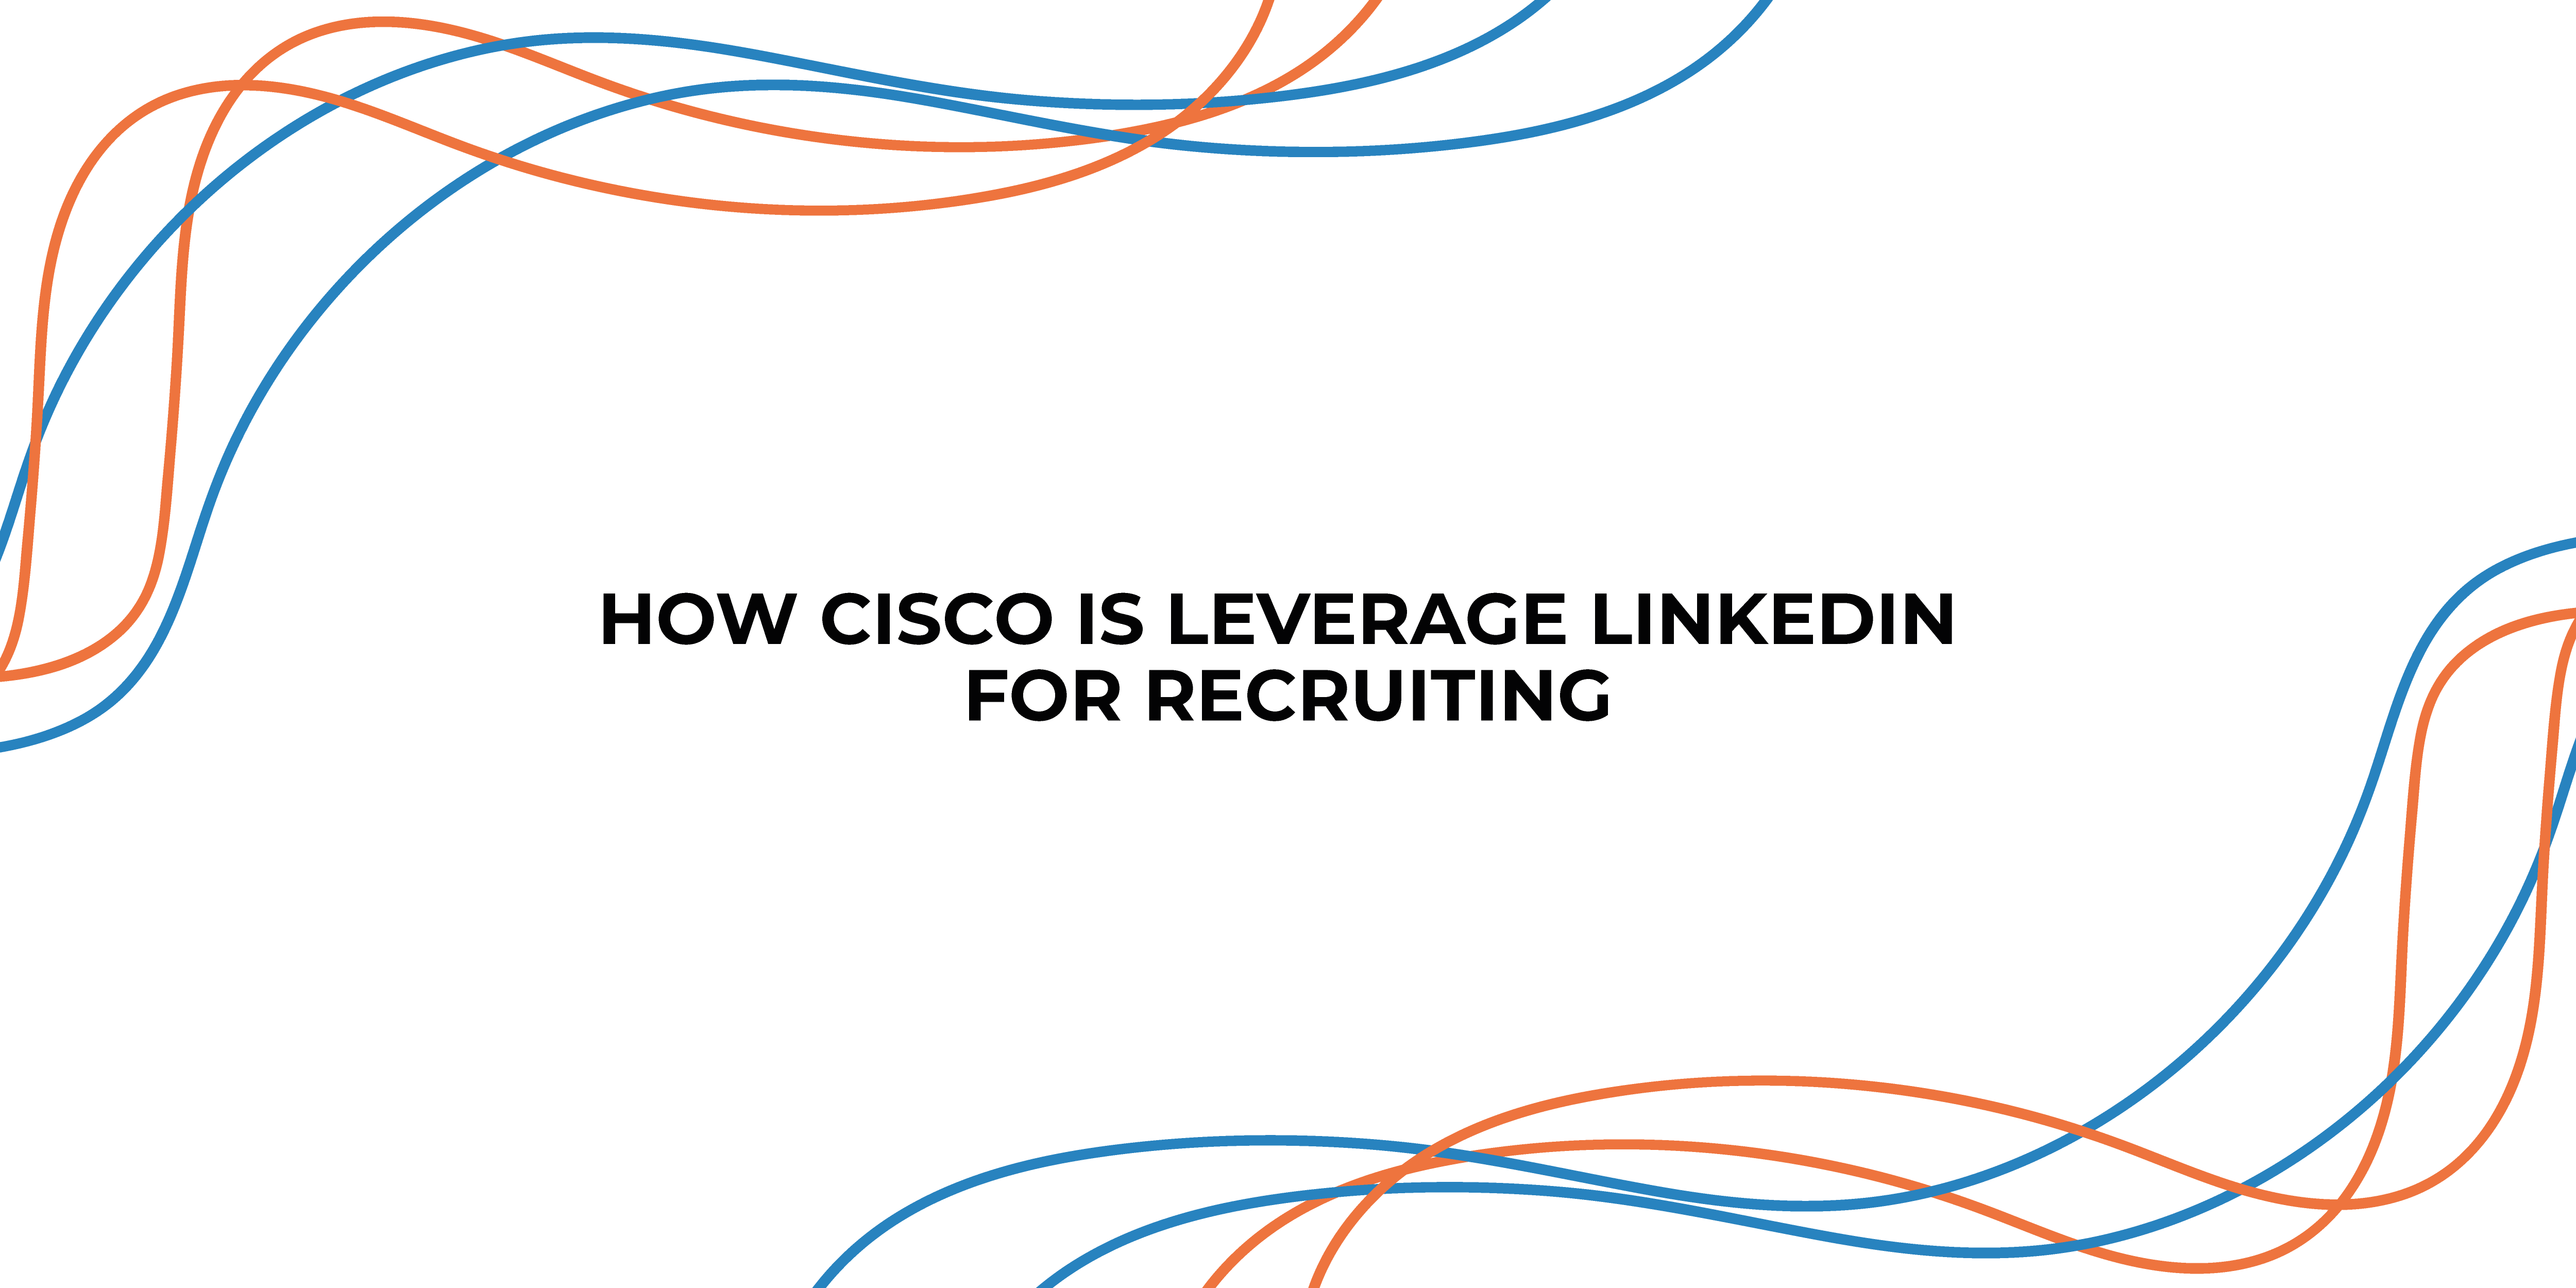 How Cisco Is Leveraging LinkedIn for Recruiting